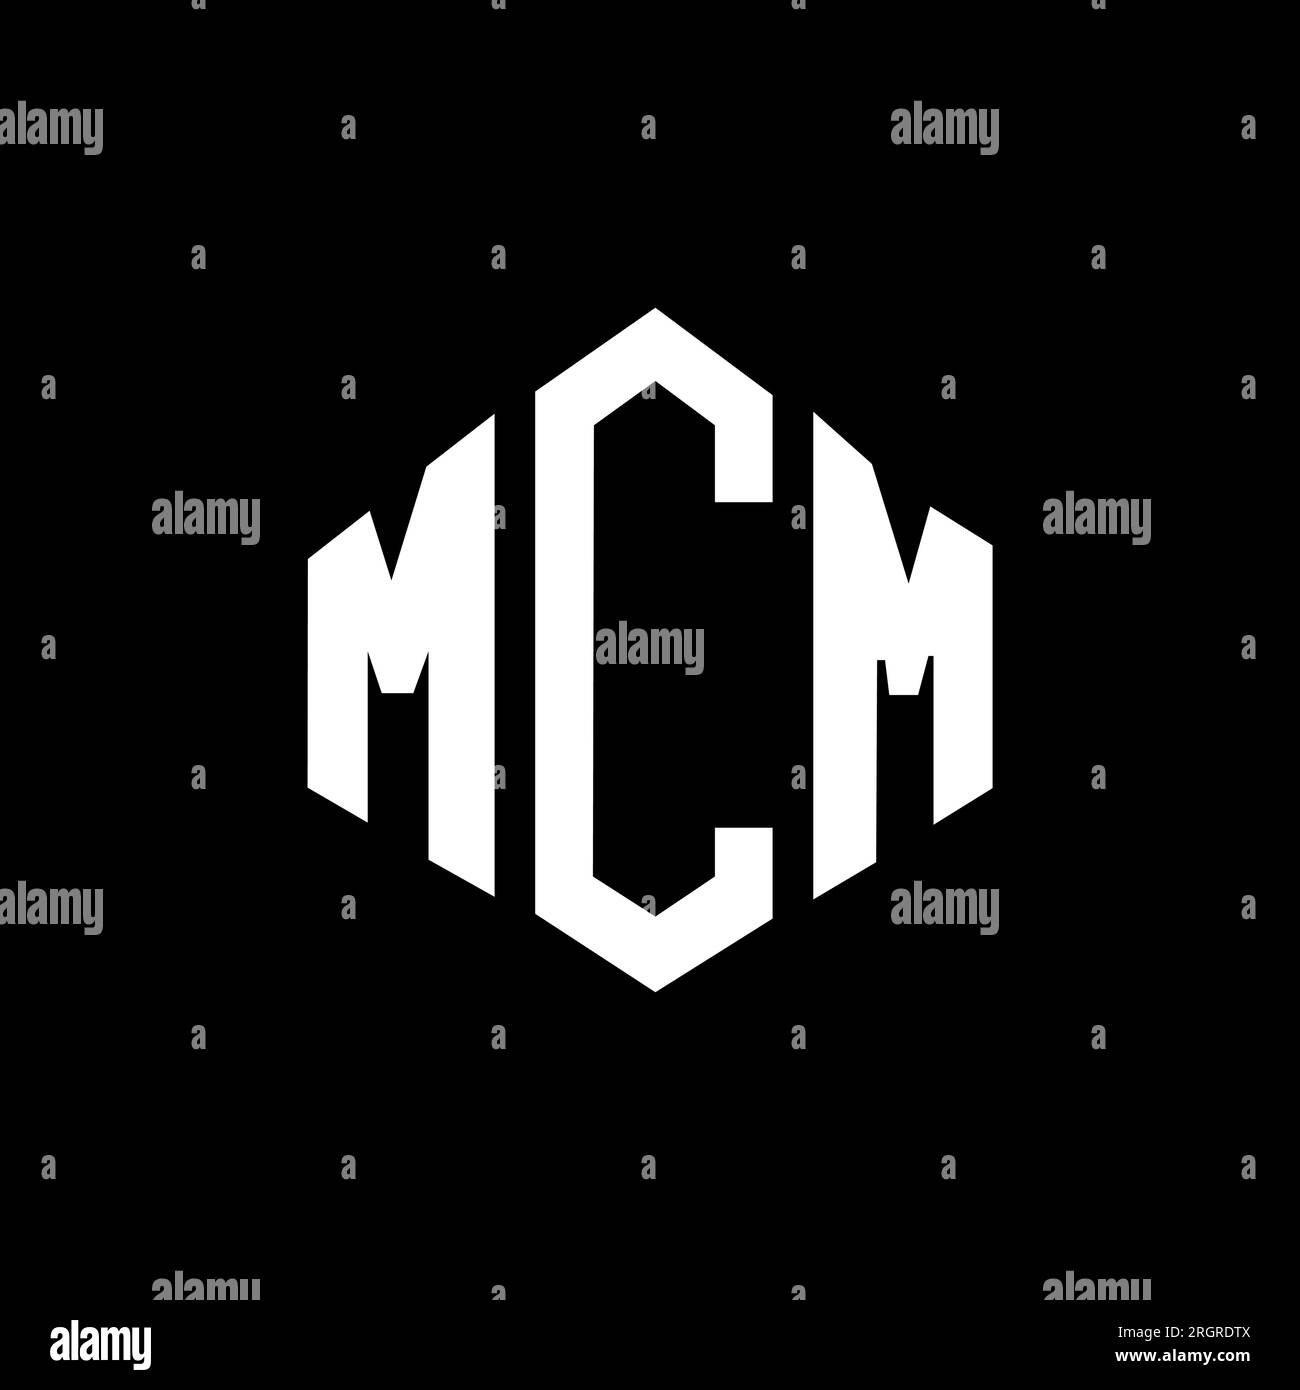 MCM abstract technology logo design on Black background. MCM creative  initials letter logo concept. 14009094 Vector Art at Vecteezy